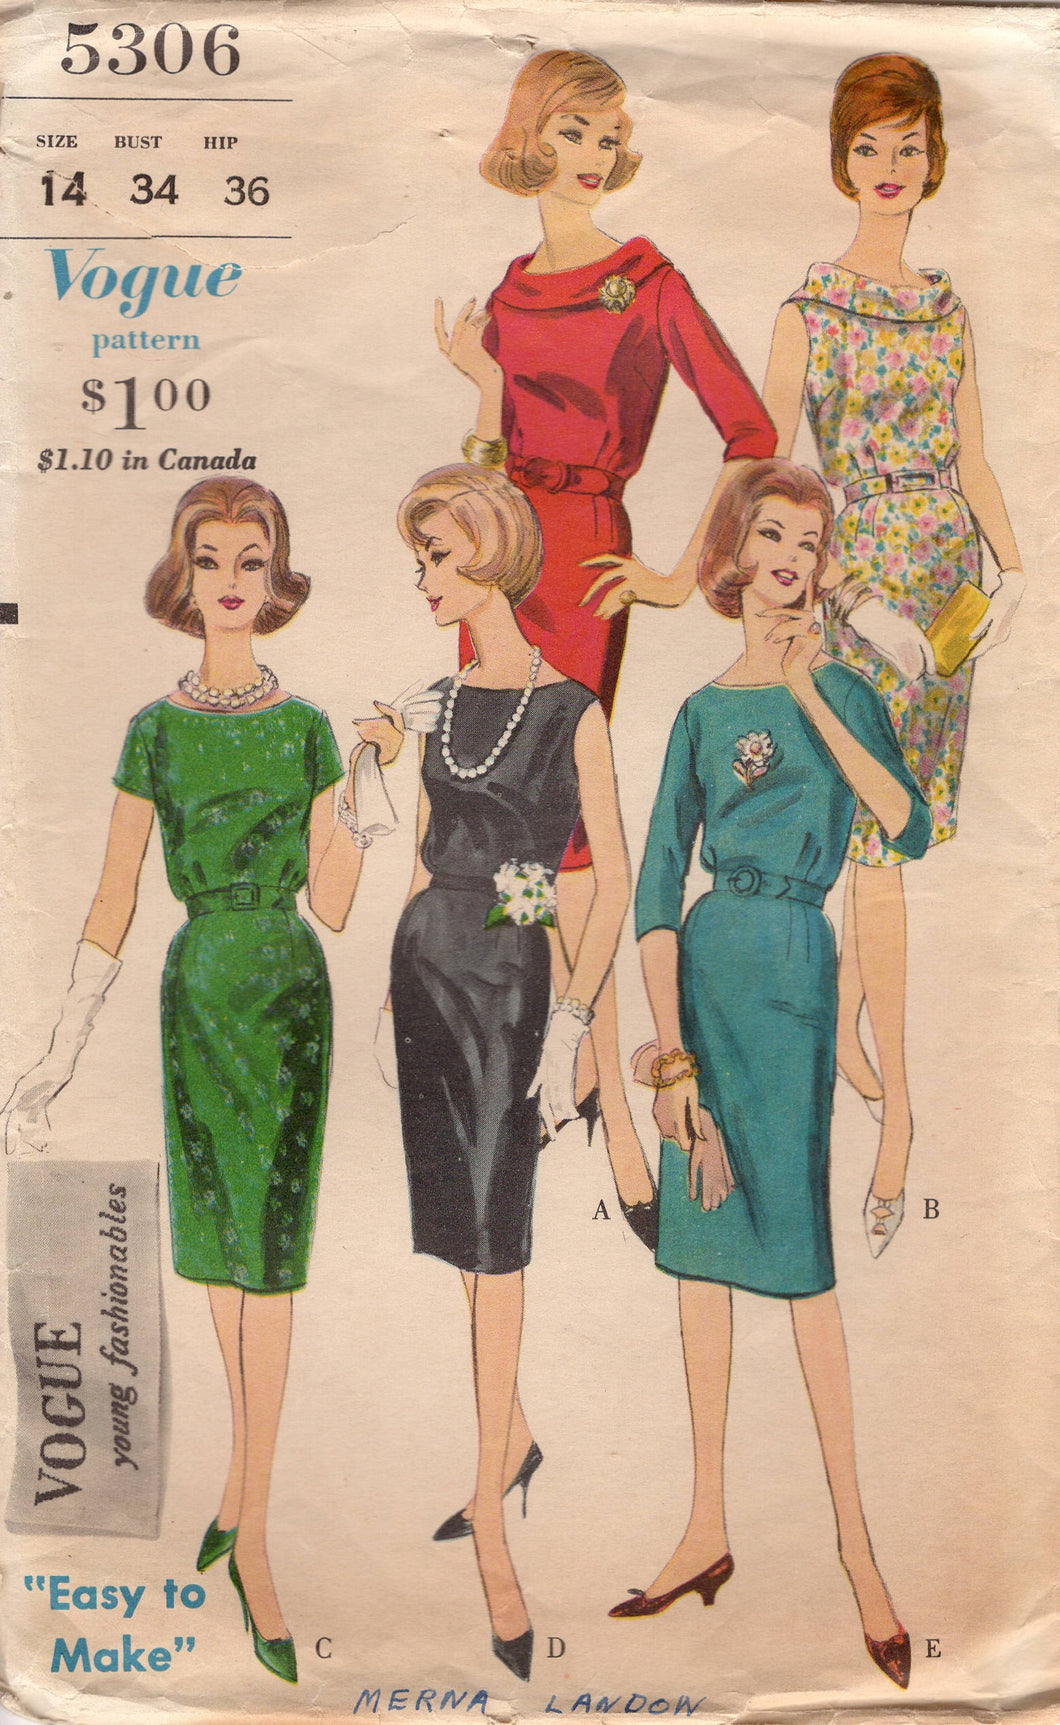 1960's Vogue Sheath Dress Pattern with Blouse Bodice and Rolled Collar - Bust 34